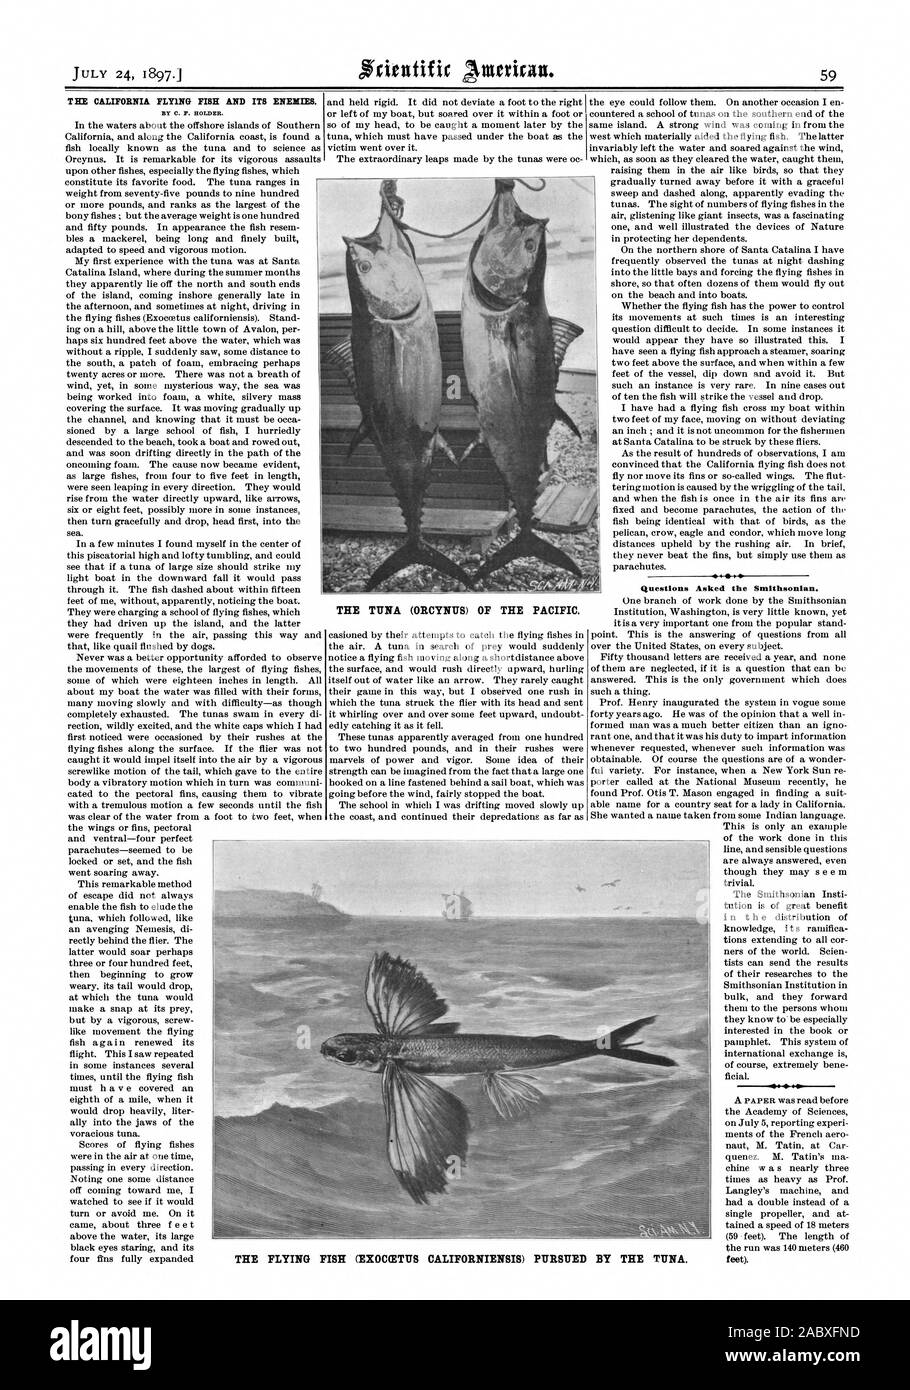 T HE CALIFORNIA FLYING FISH AND ITS ENEMIES. BY C. F. HOLDER. THE TUNA (ORCYNITS) OF THE PACIFIC Questions Asked the Smithsonian.  T THE FLYING FISH (EXOCCETITS CALIFORNIENSIS) PURSUED BY THE TUNA., scientific american, 1897-07-24 Stock Photo